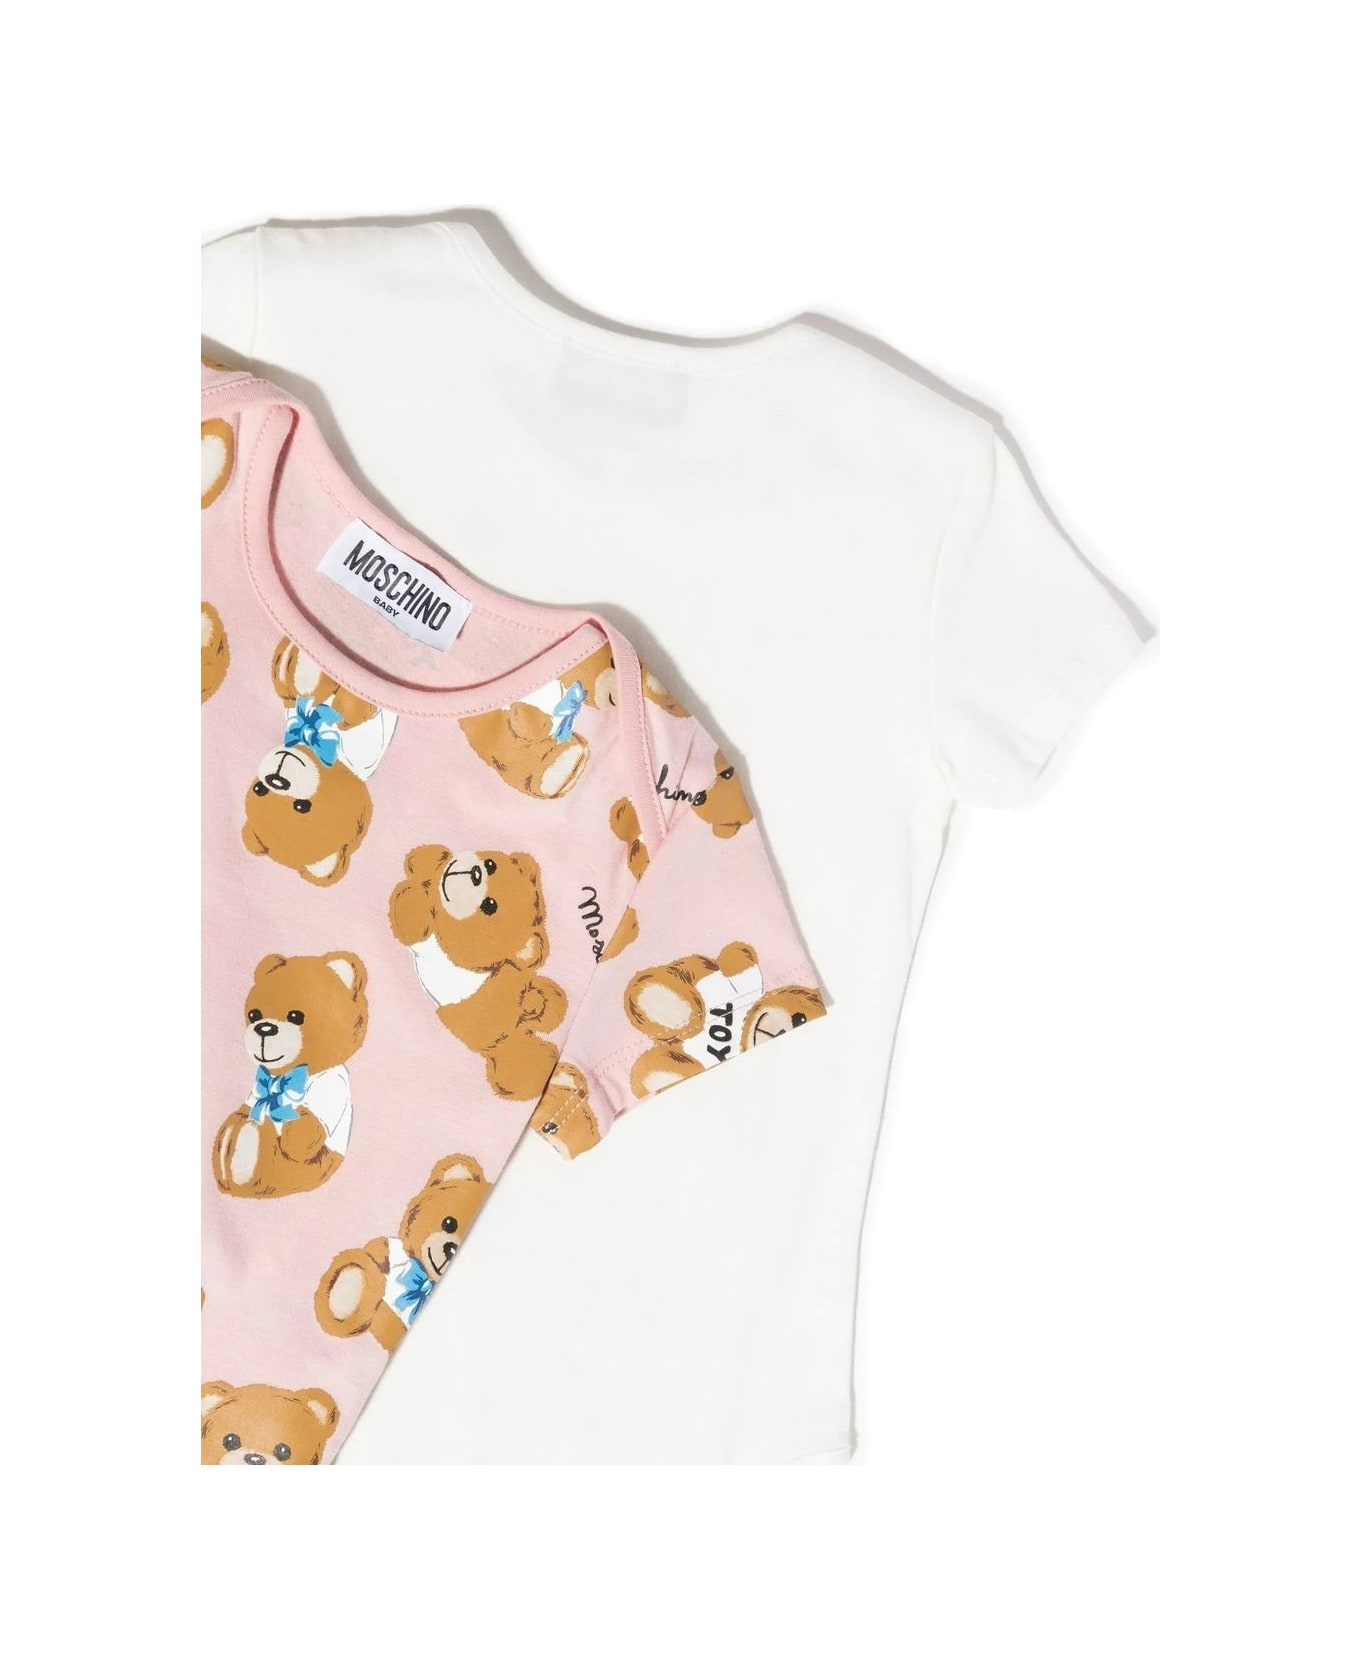 Moschino Set 2 Baby Bodysuits In White And Pink Cotton With Moschino Teddy Bear Print - Cloud